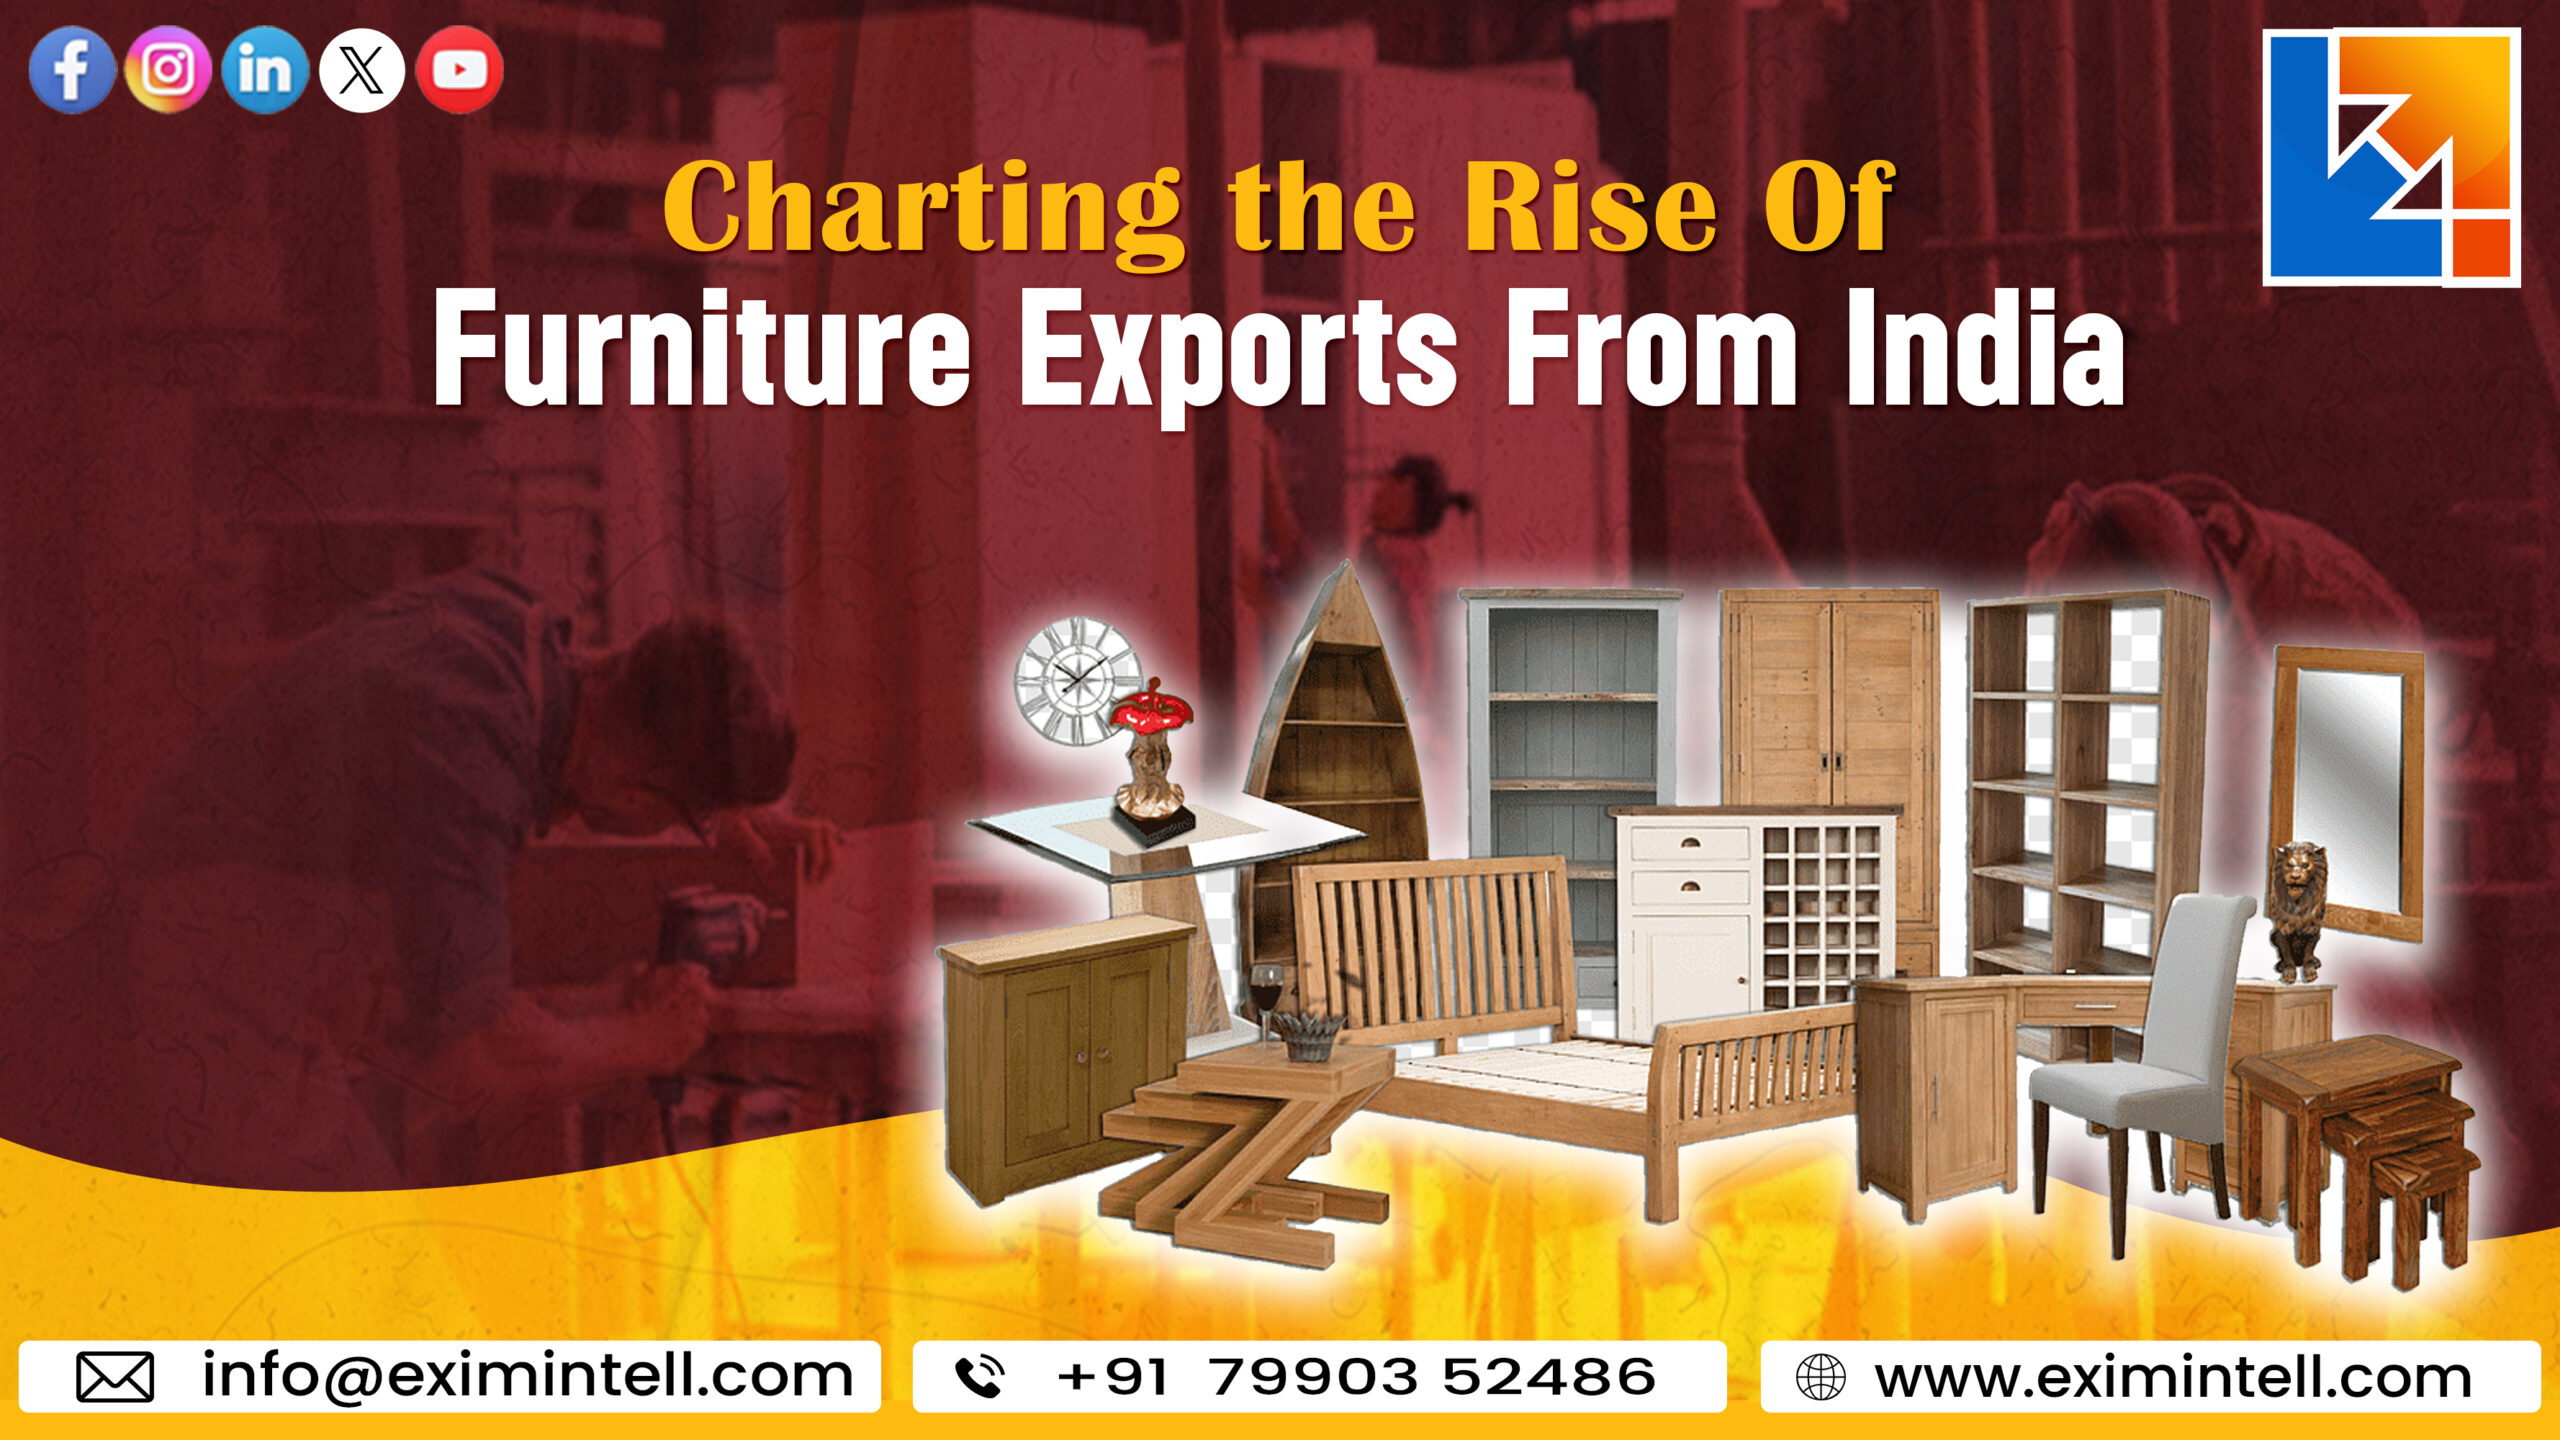 Charting the Rise of Furniture Exports from India